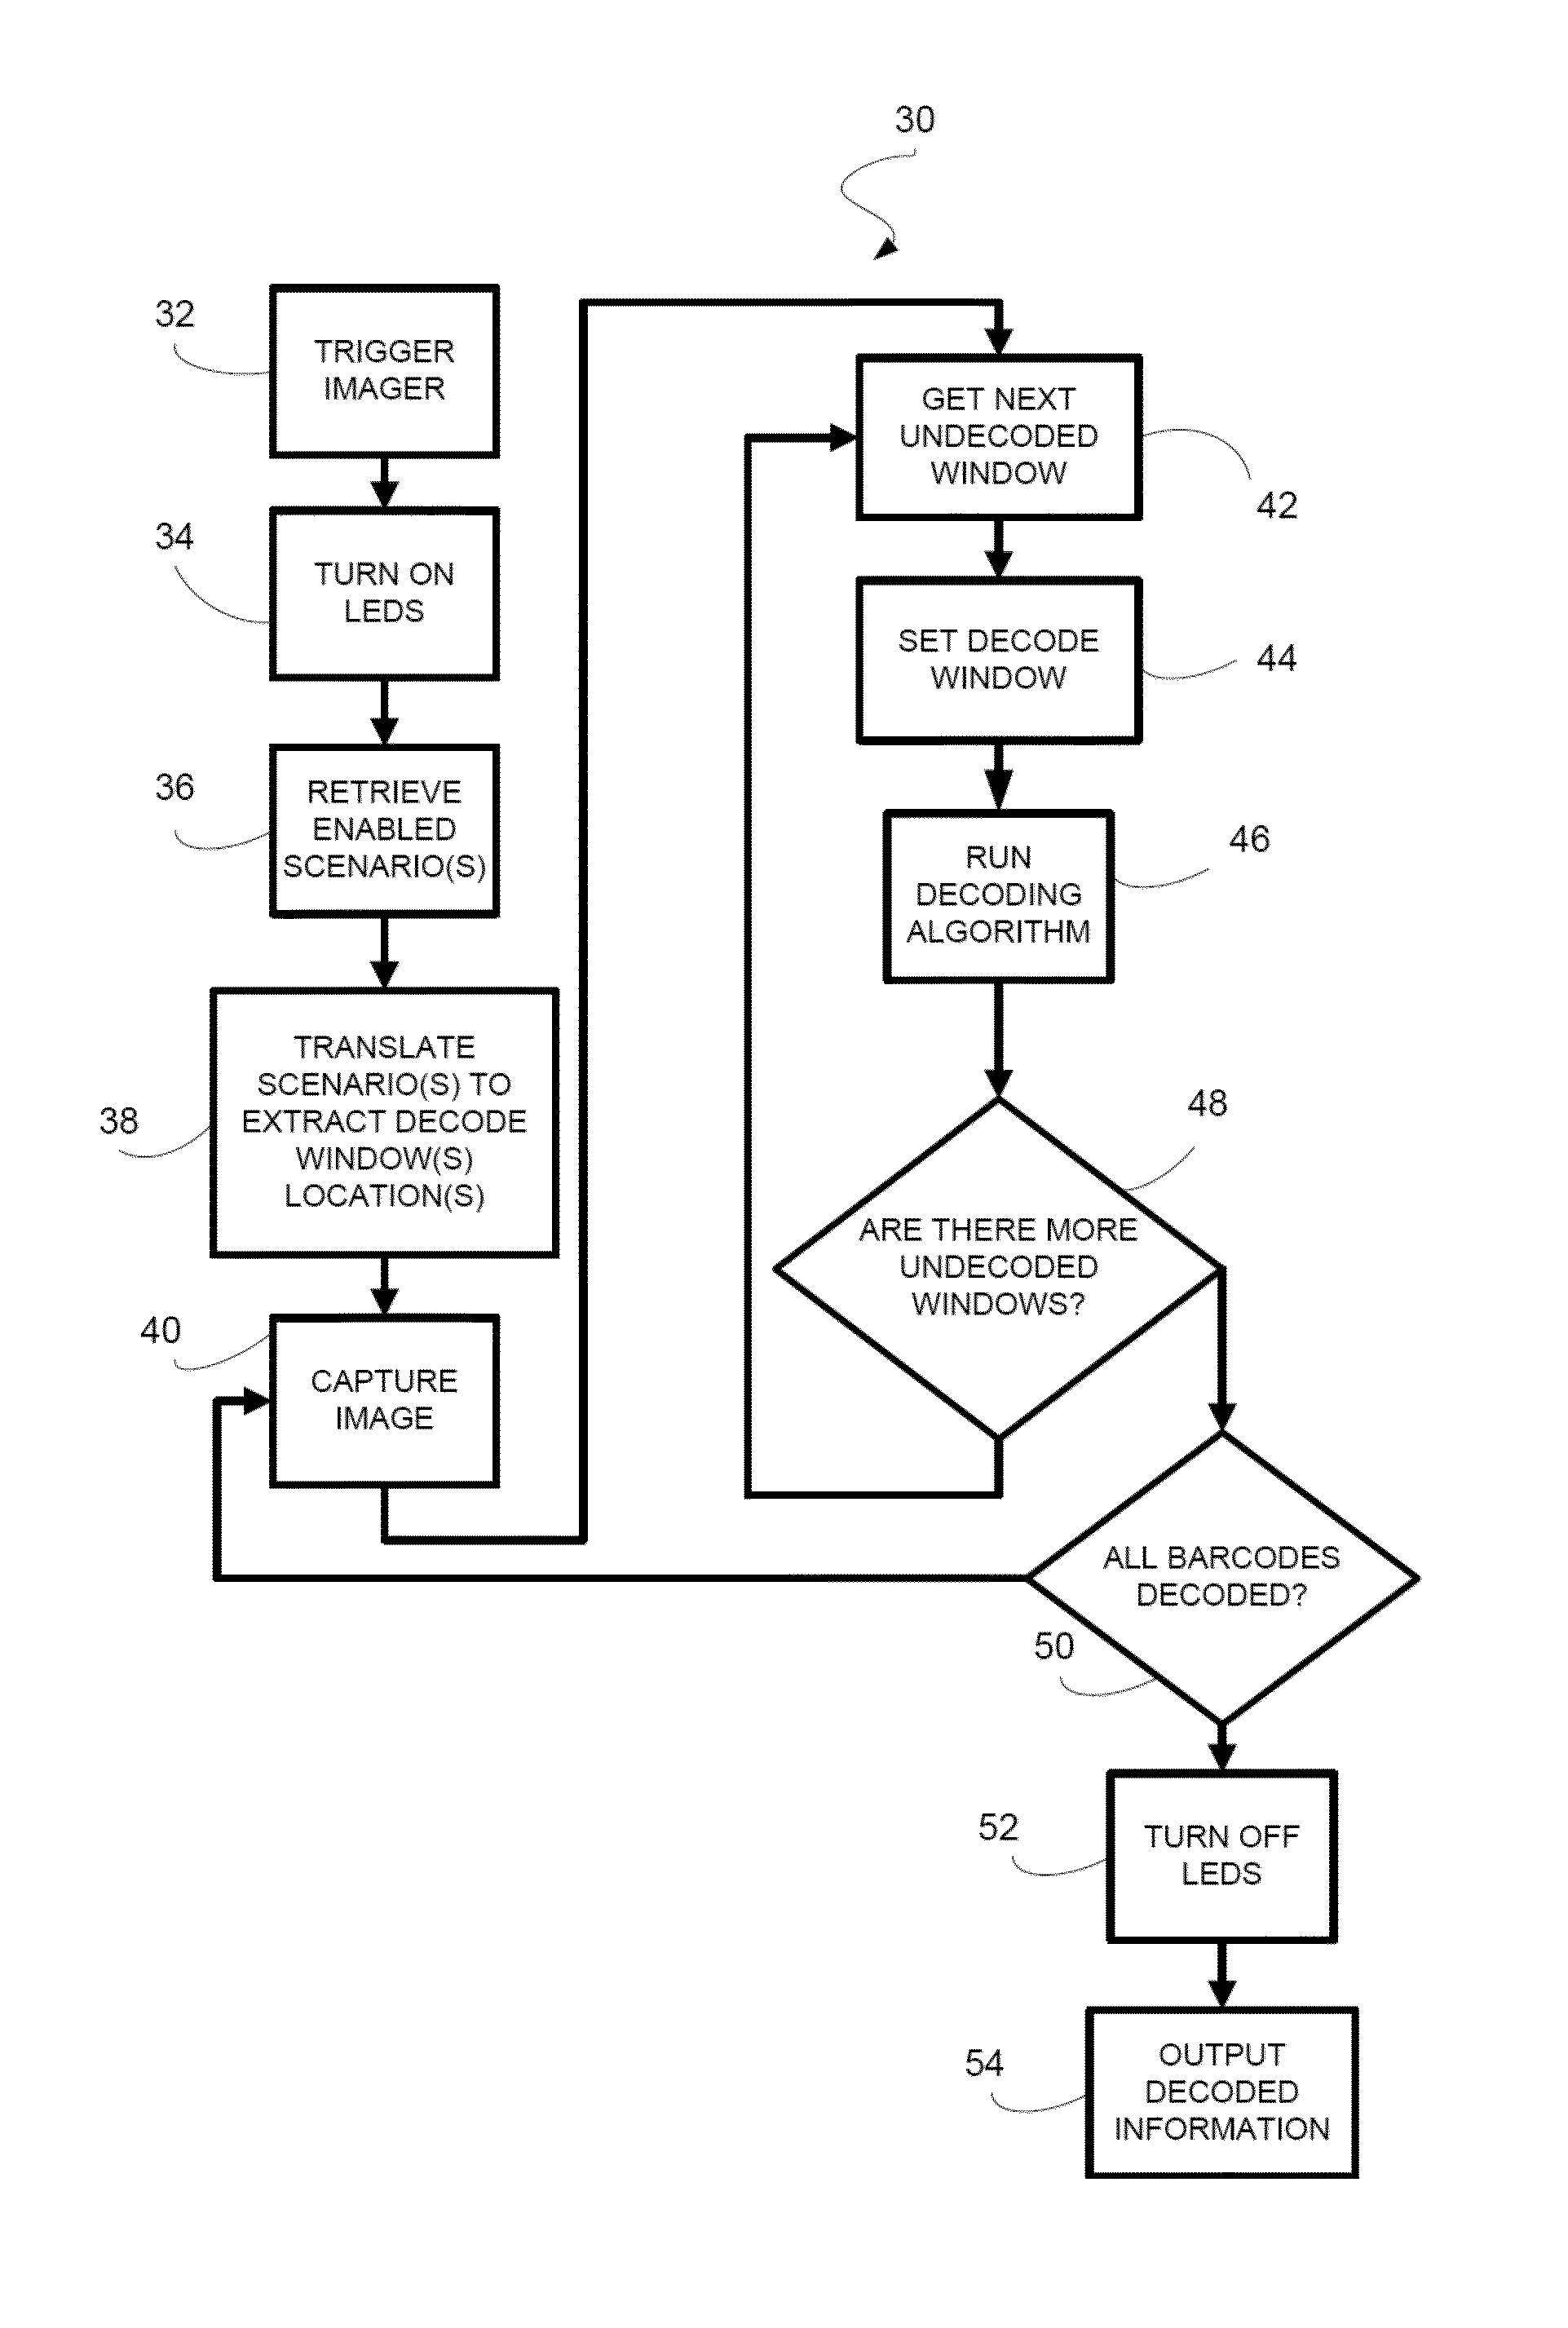 Scenario Windowing For Expedited Decoding of Multiple Barcodes